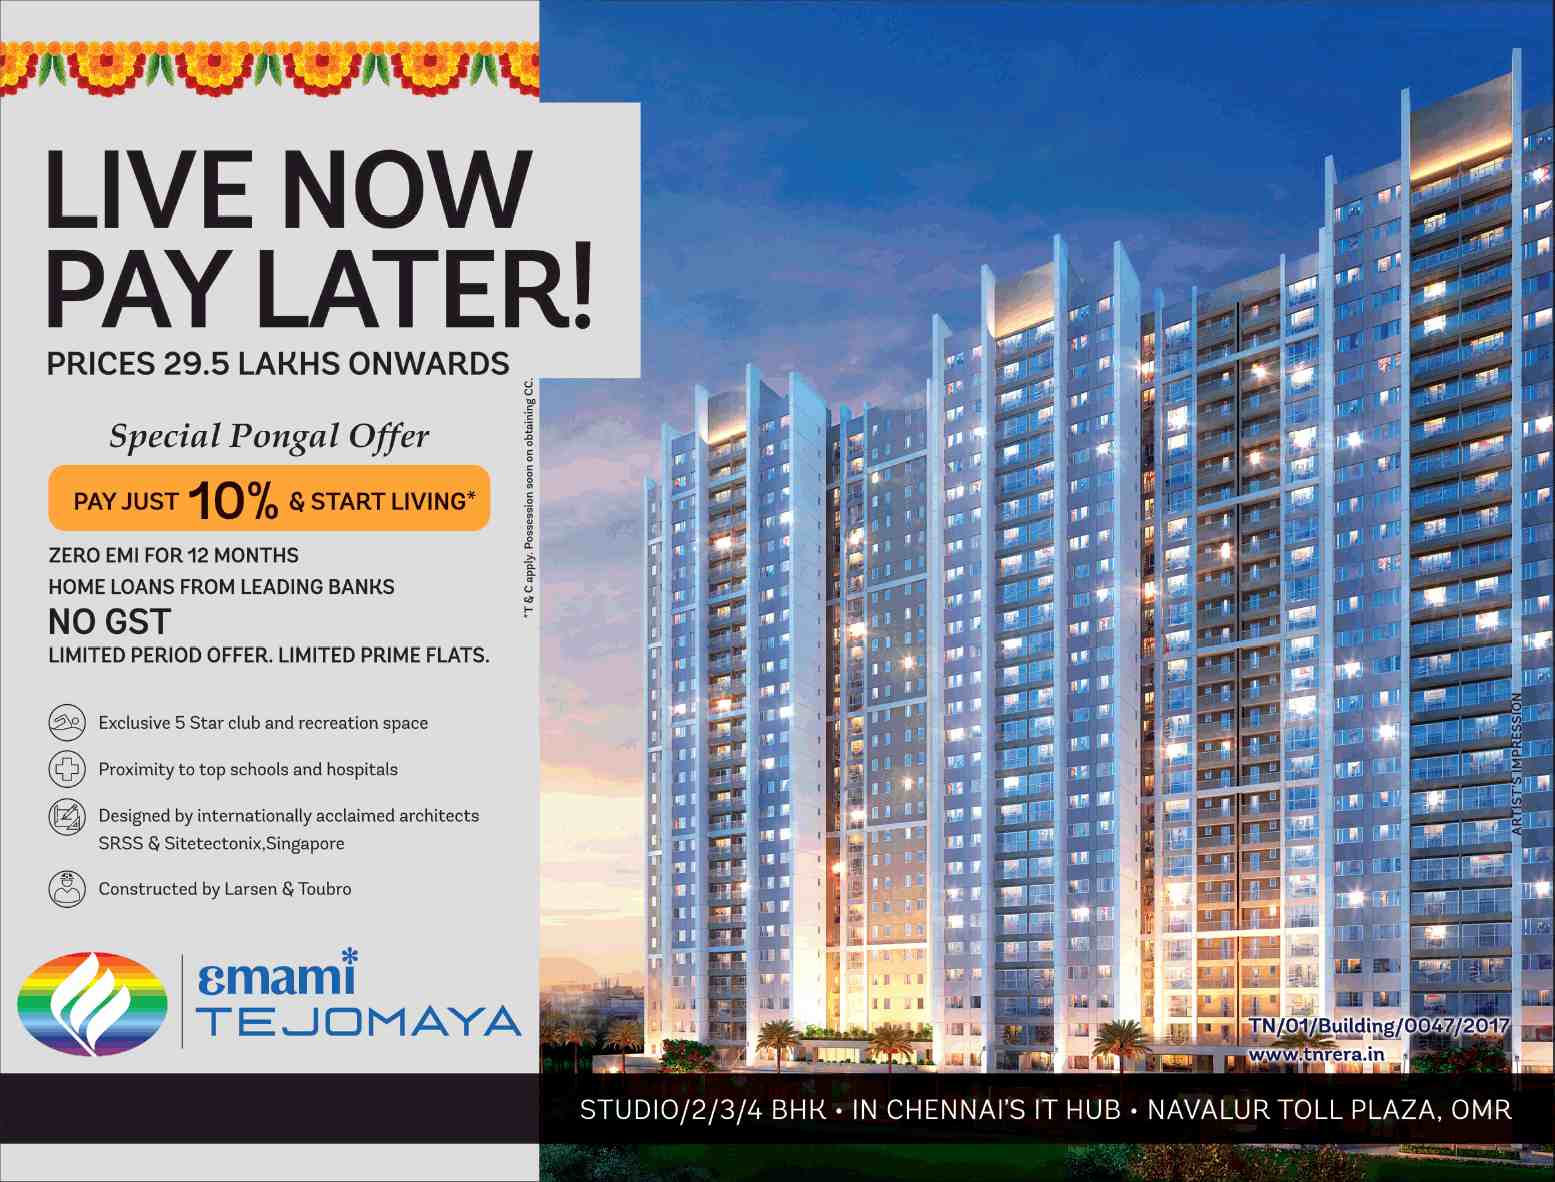 Pay just 10% and start living at Emami Tejomaya in Chennai Update